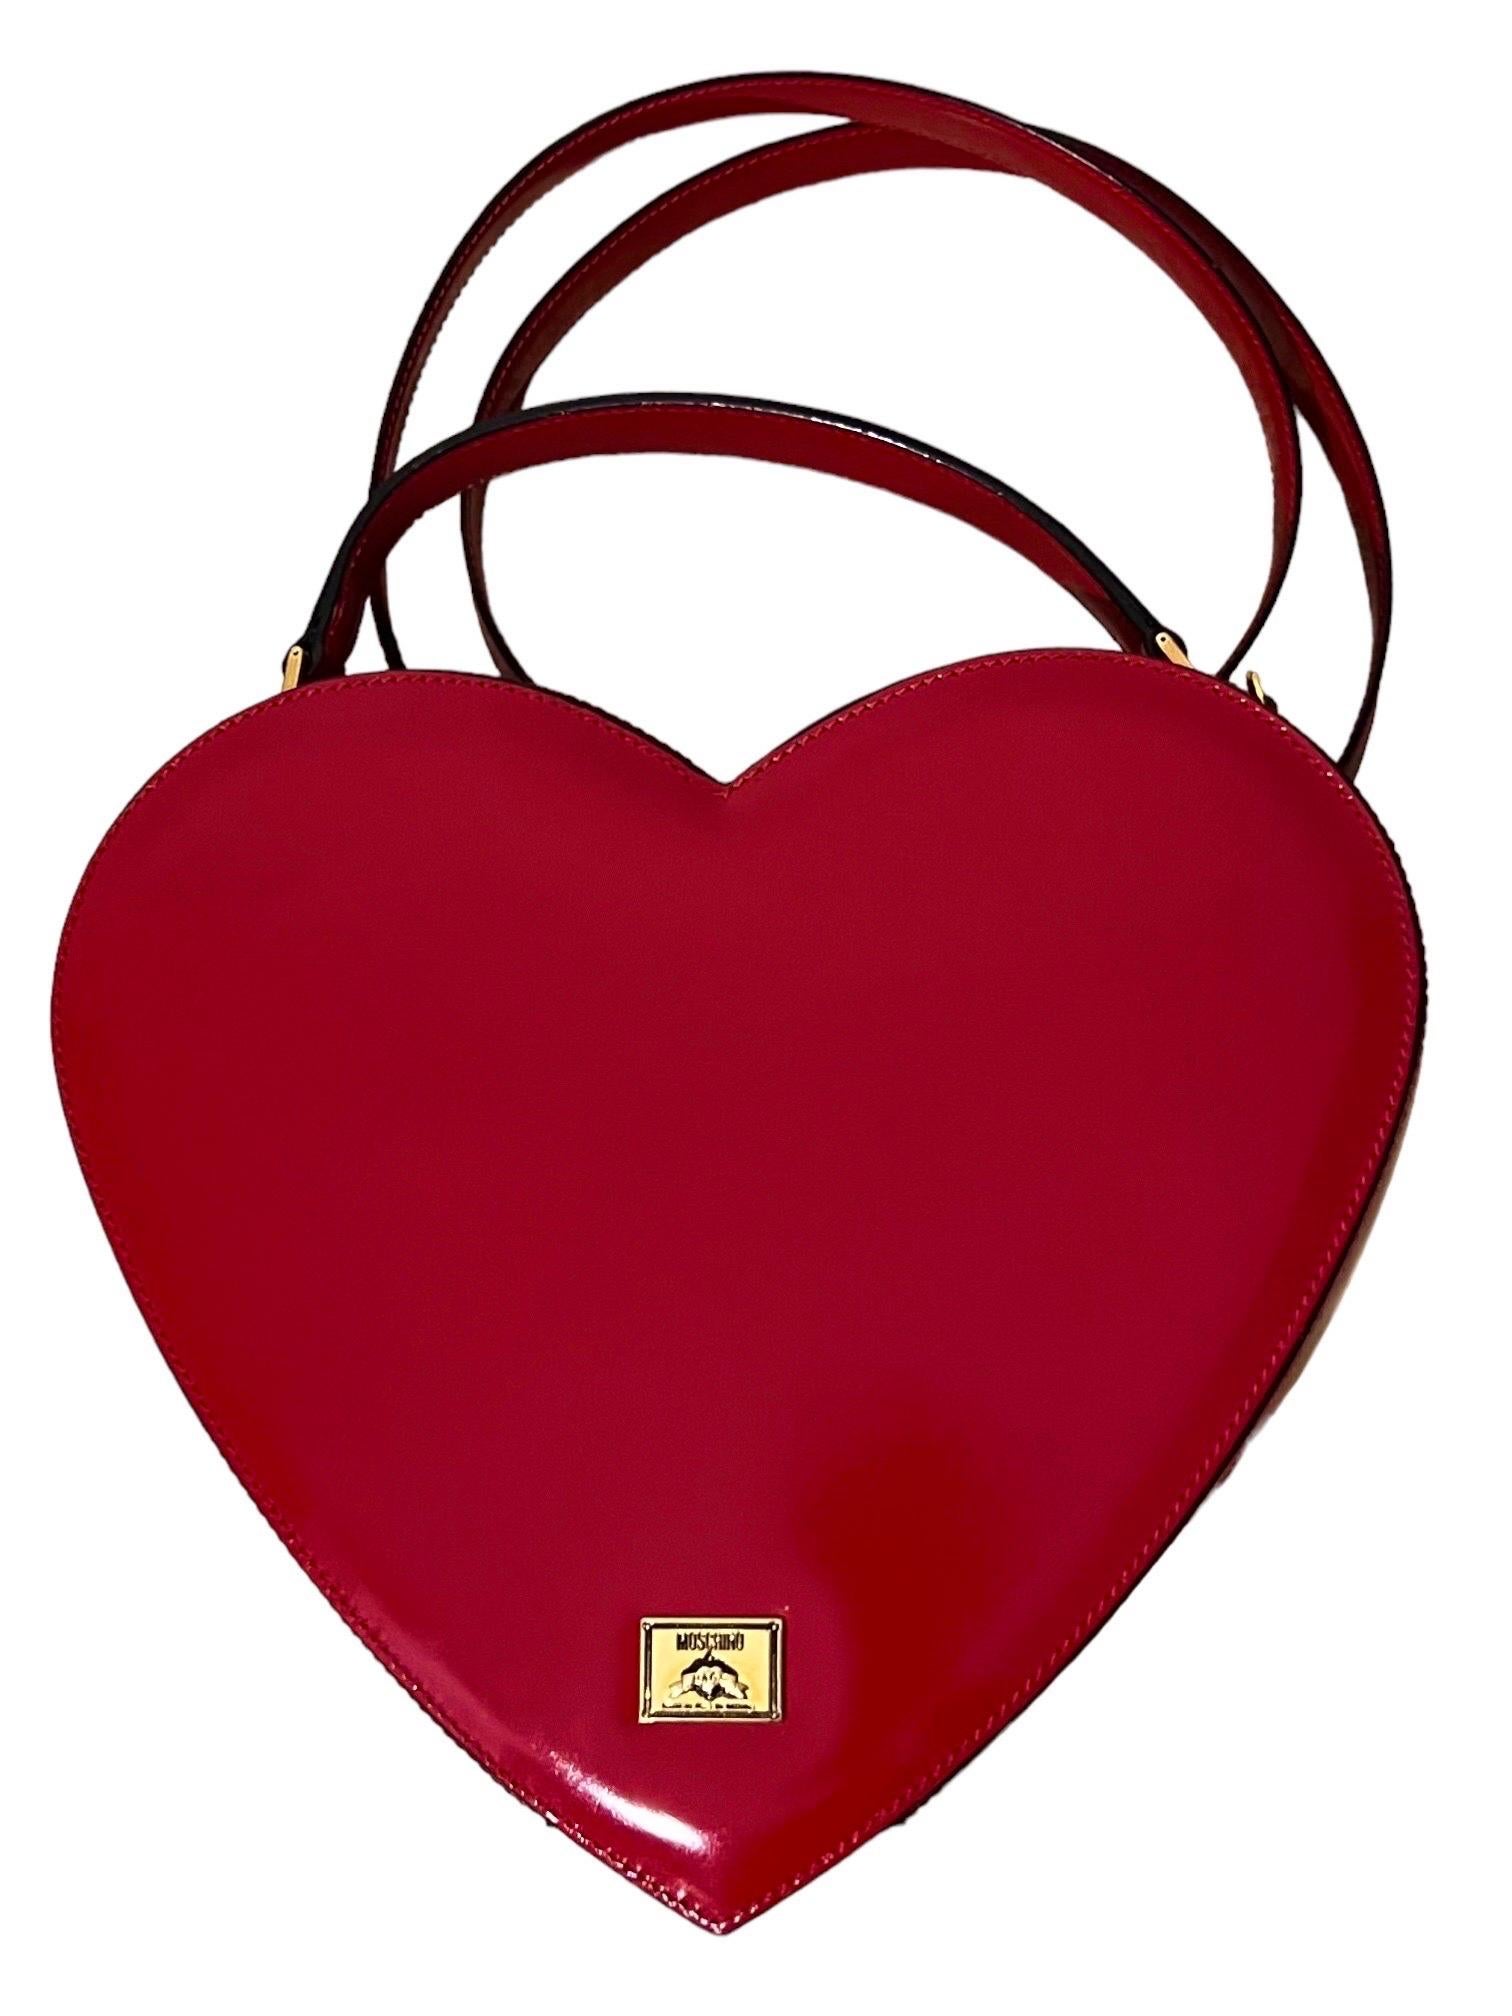 Moschino Vintage Red Leather Heart Bag The Nanny 2